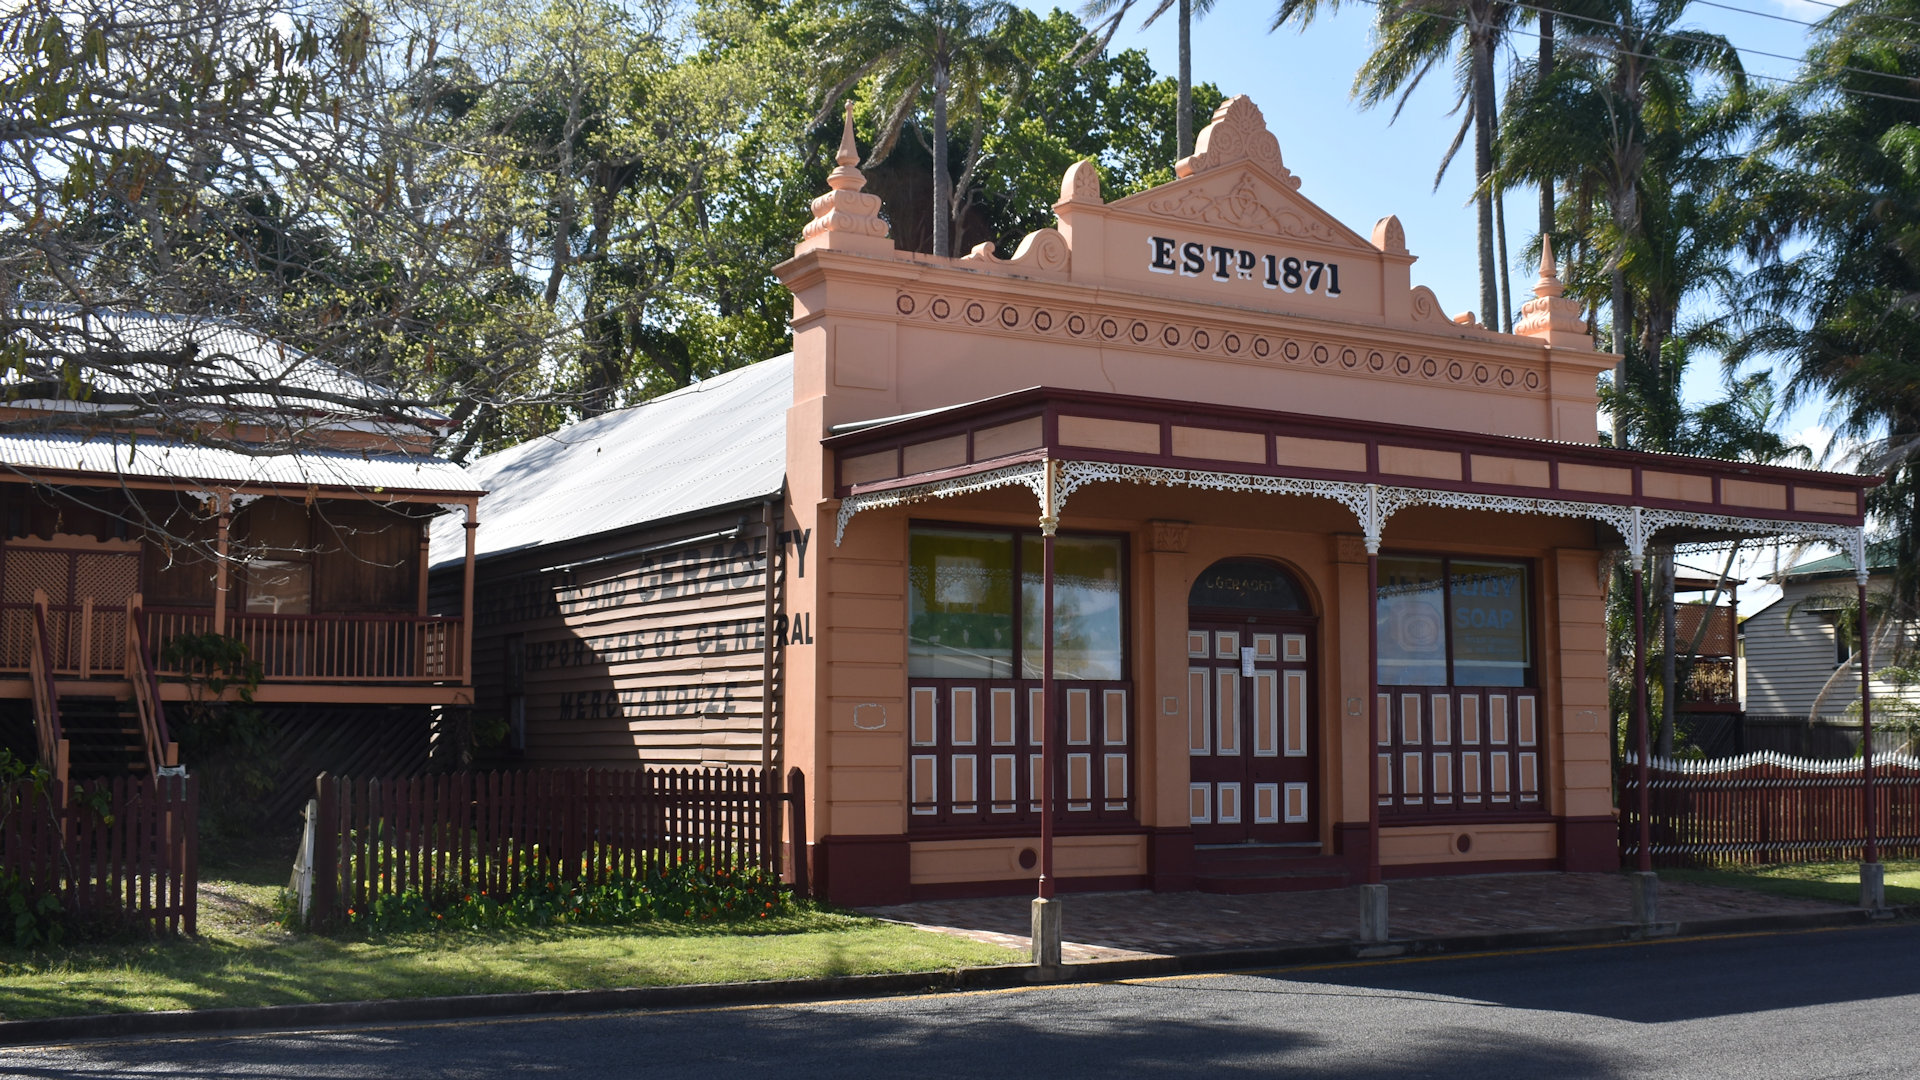 Historical Commercial Store, the Brennan & Geraghtys Store Museum in Maryborough